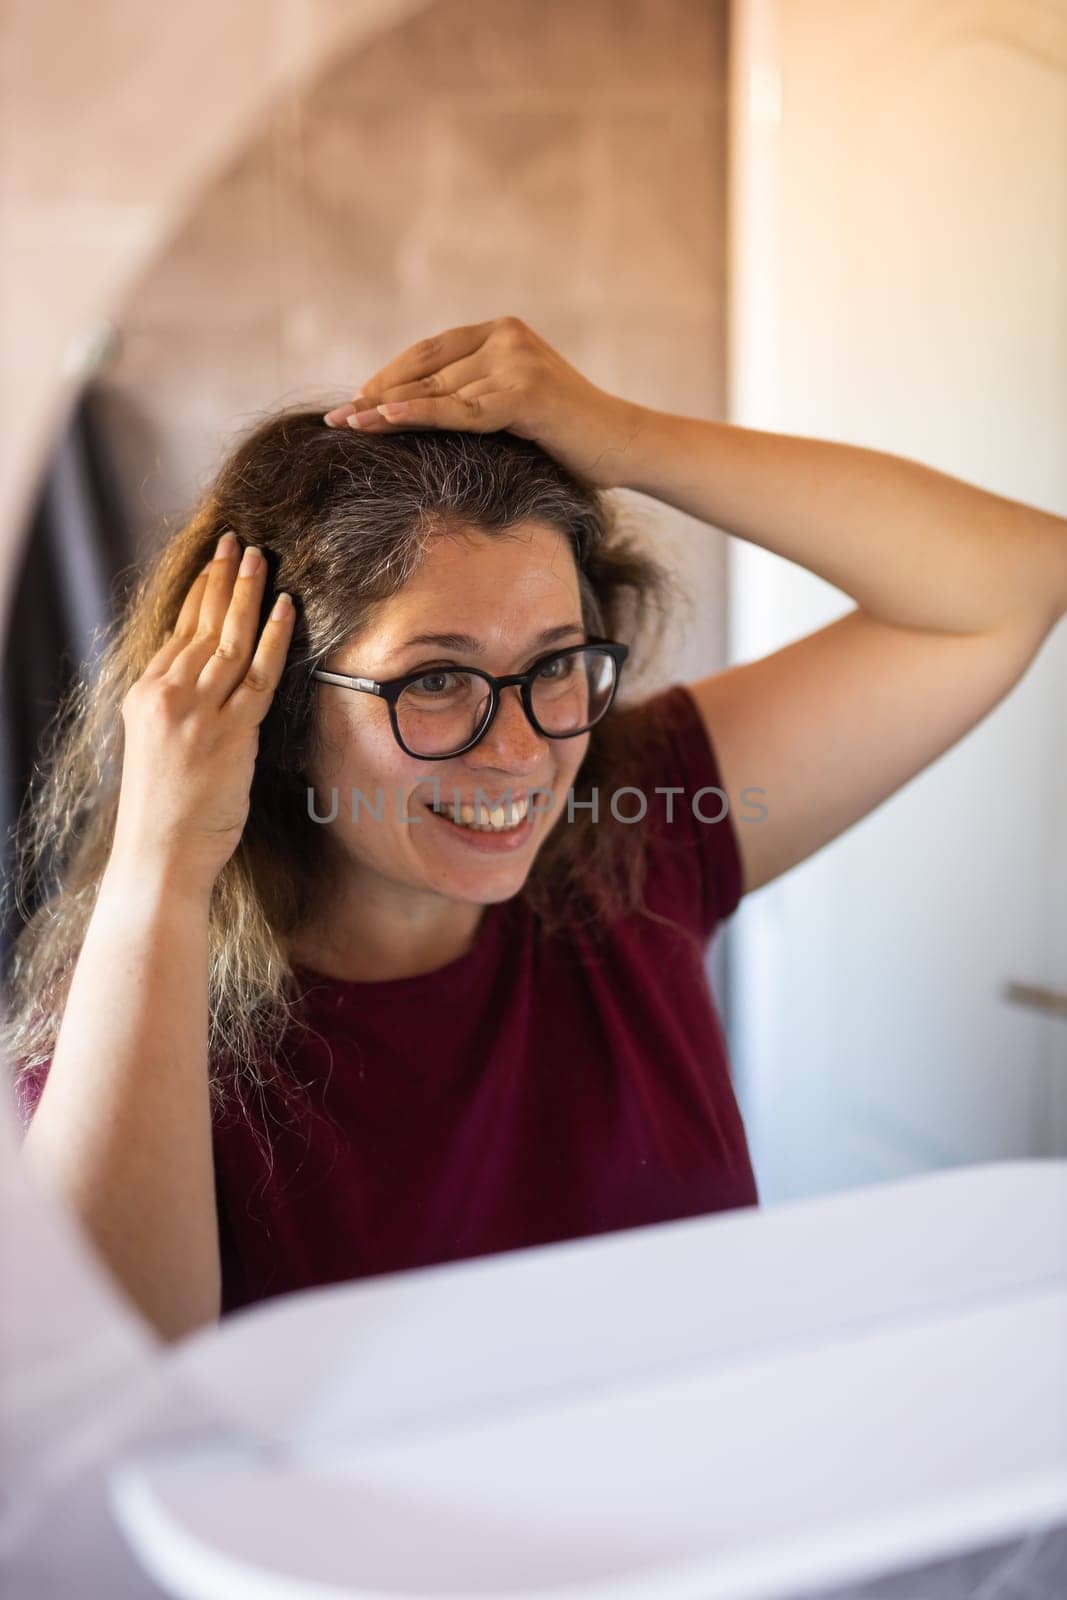 Gray haired surprised caucasian middle aged woman looking at grey hair head in mirror reflection